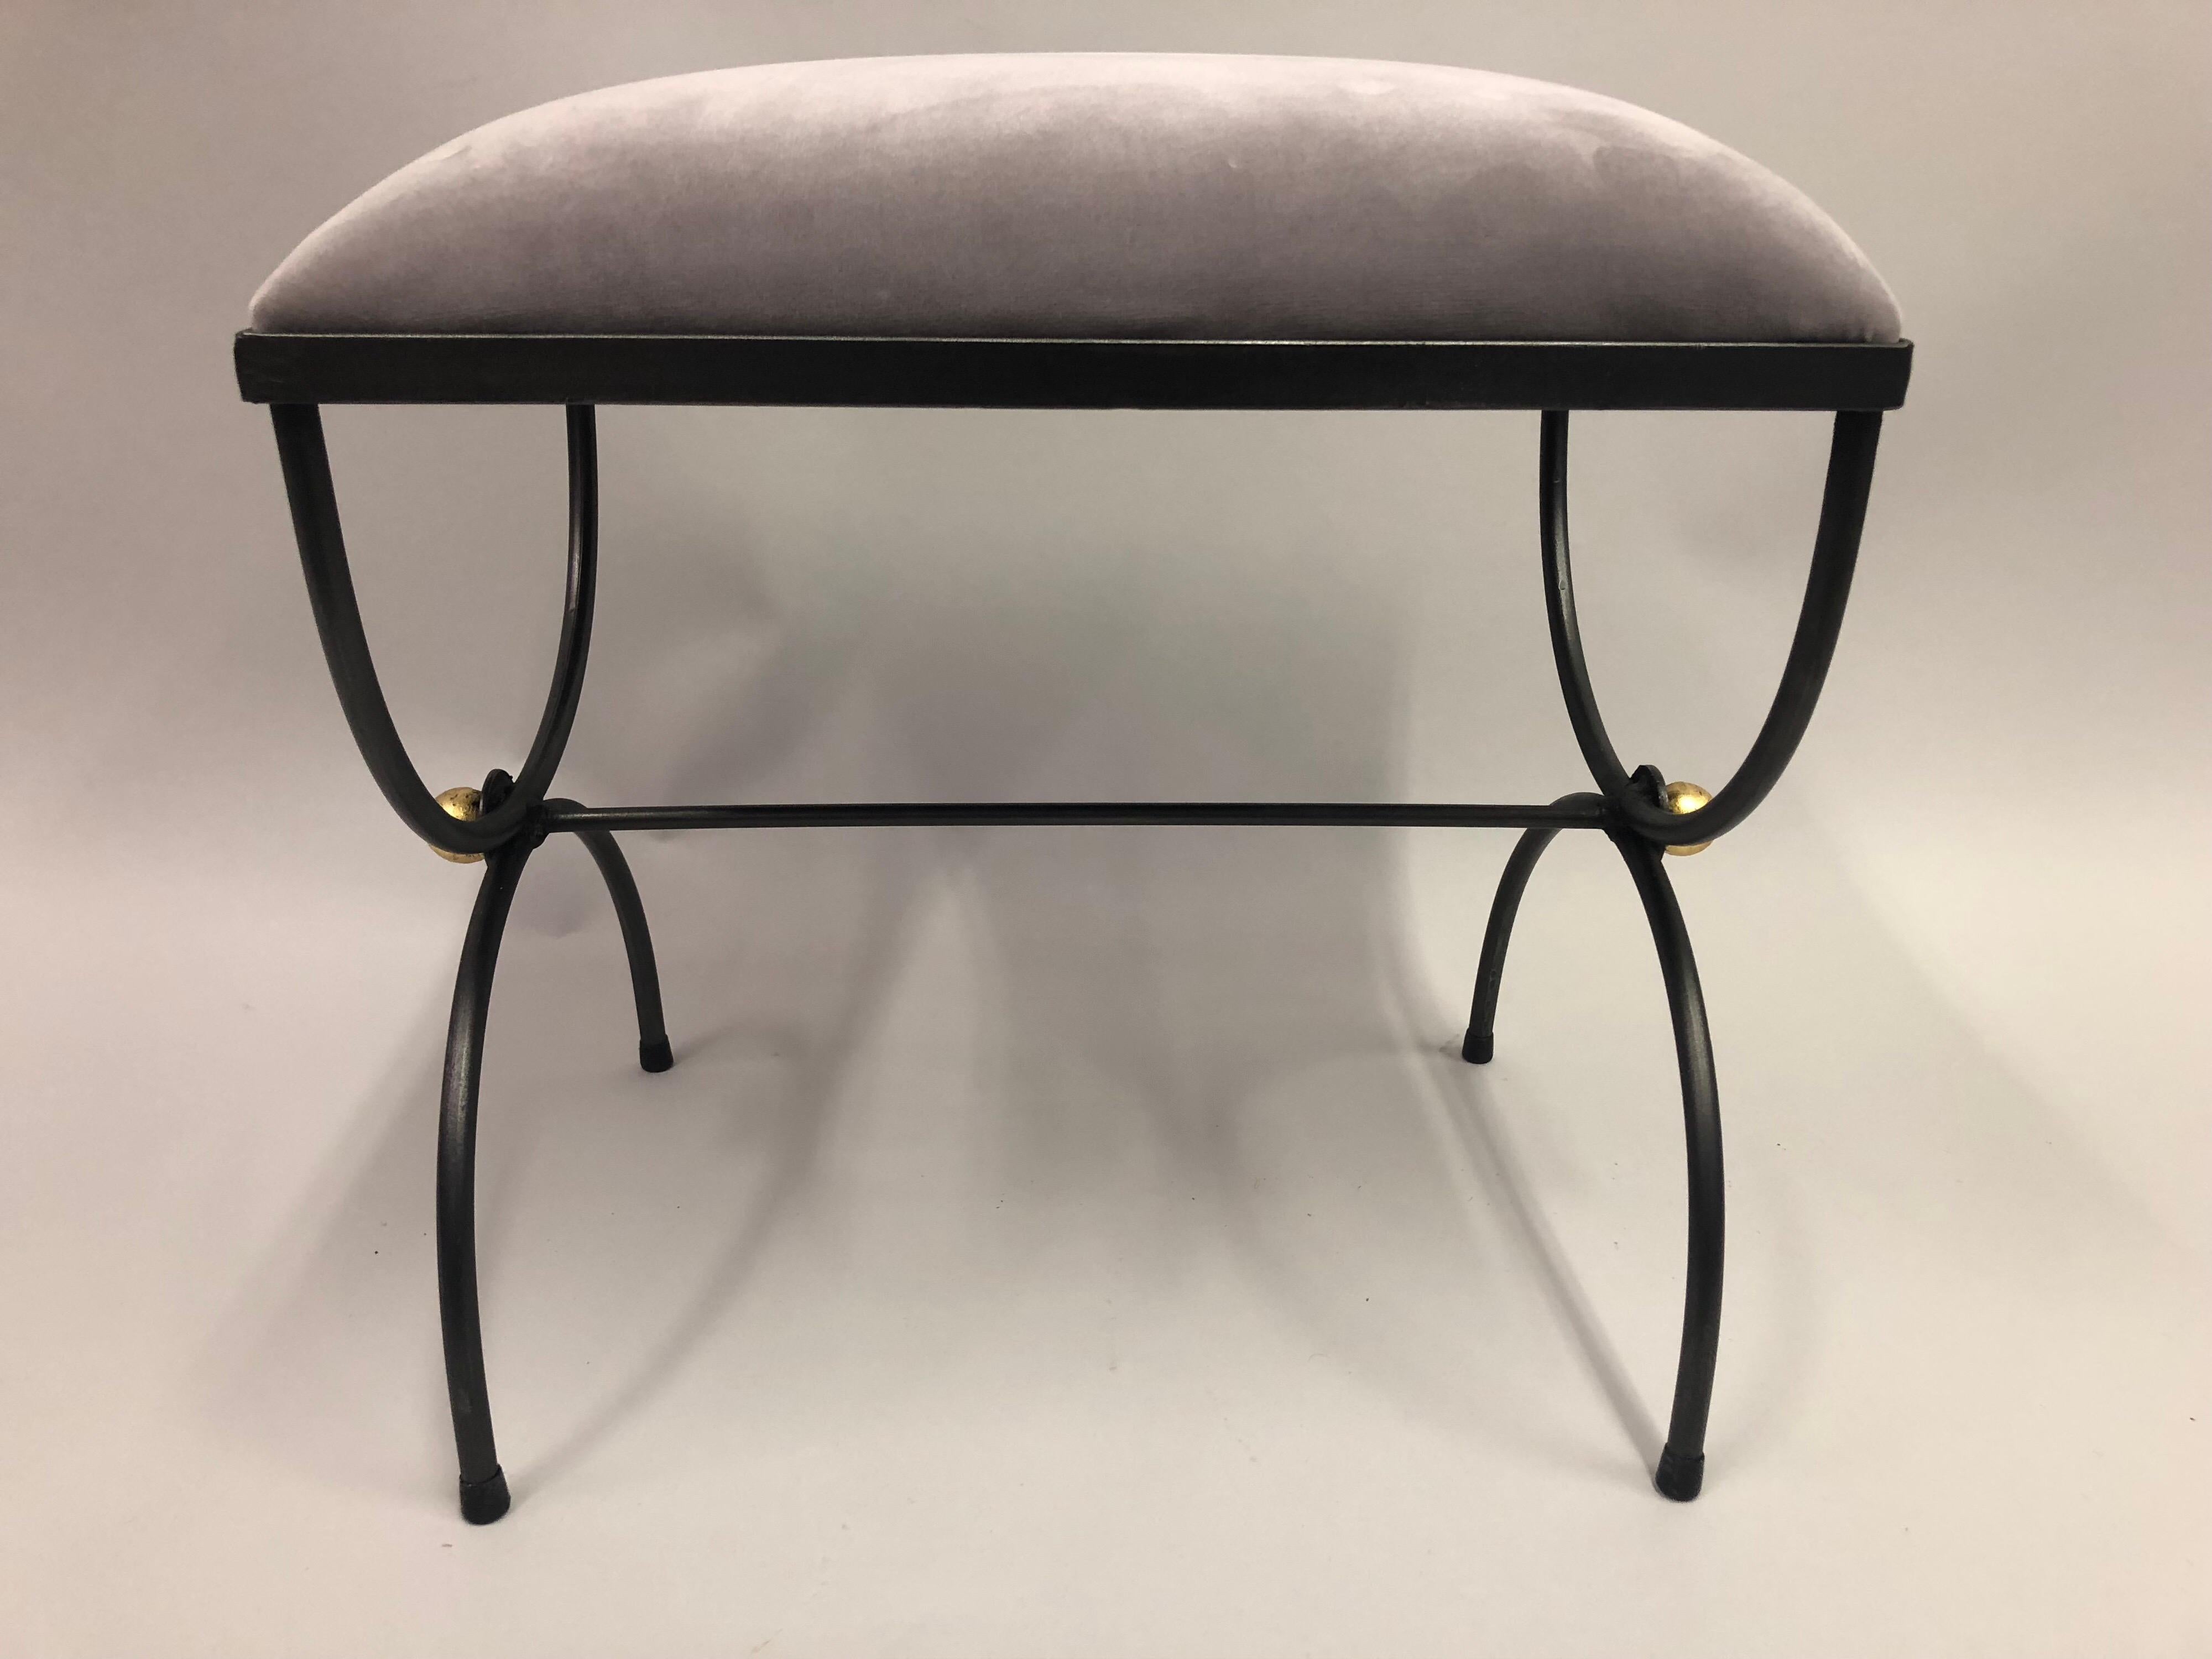 Pair of Mid-Century Modern Neoclassical Wrought Iron and Gilt Benches or Stools For Sale 1